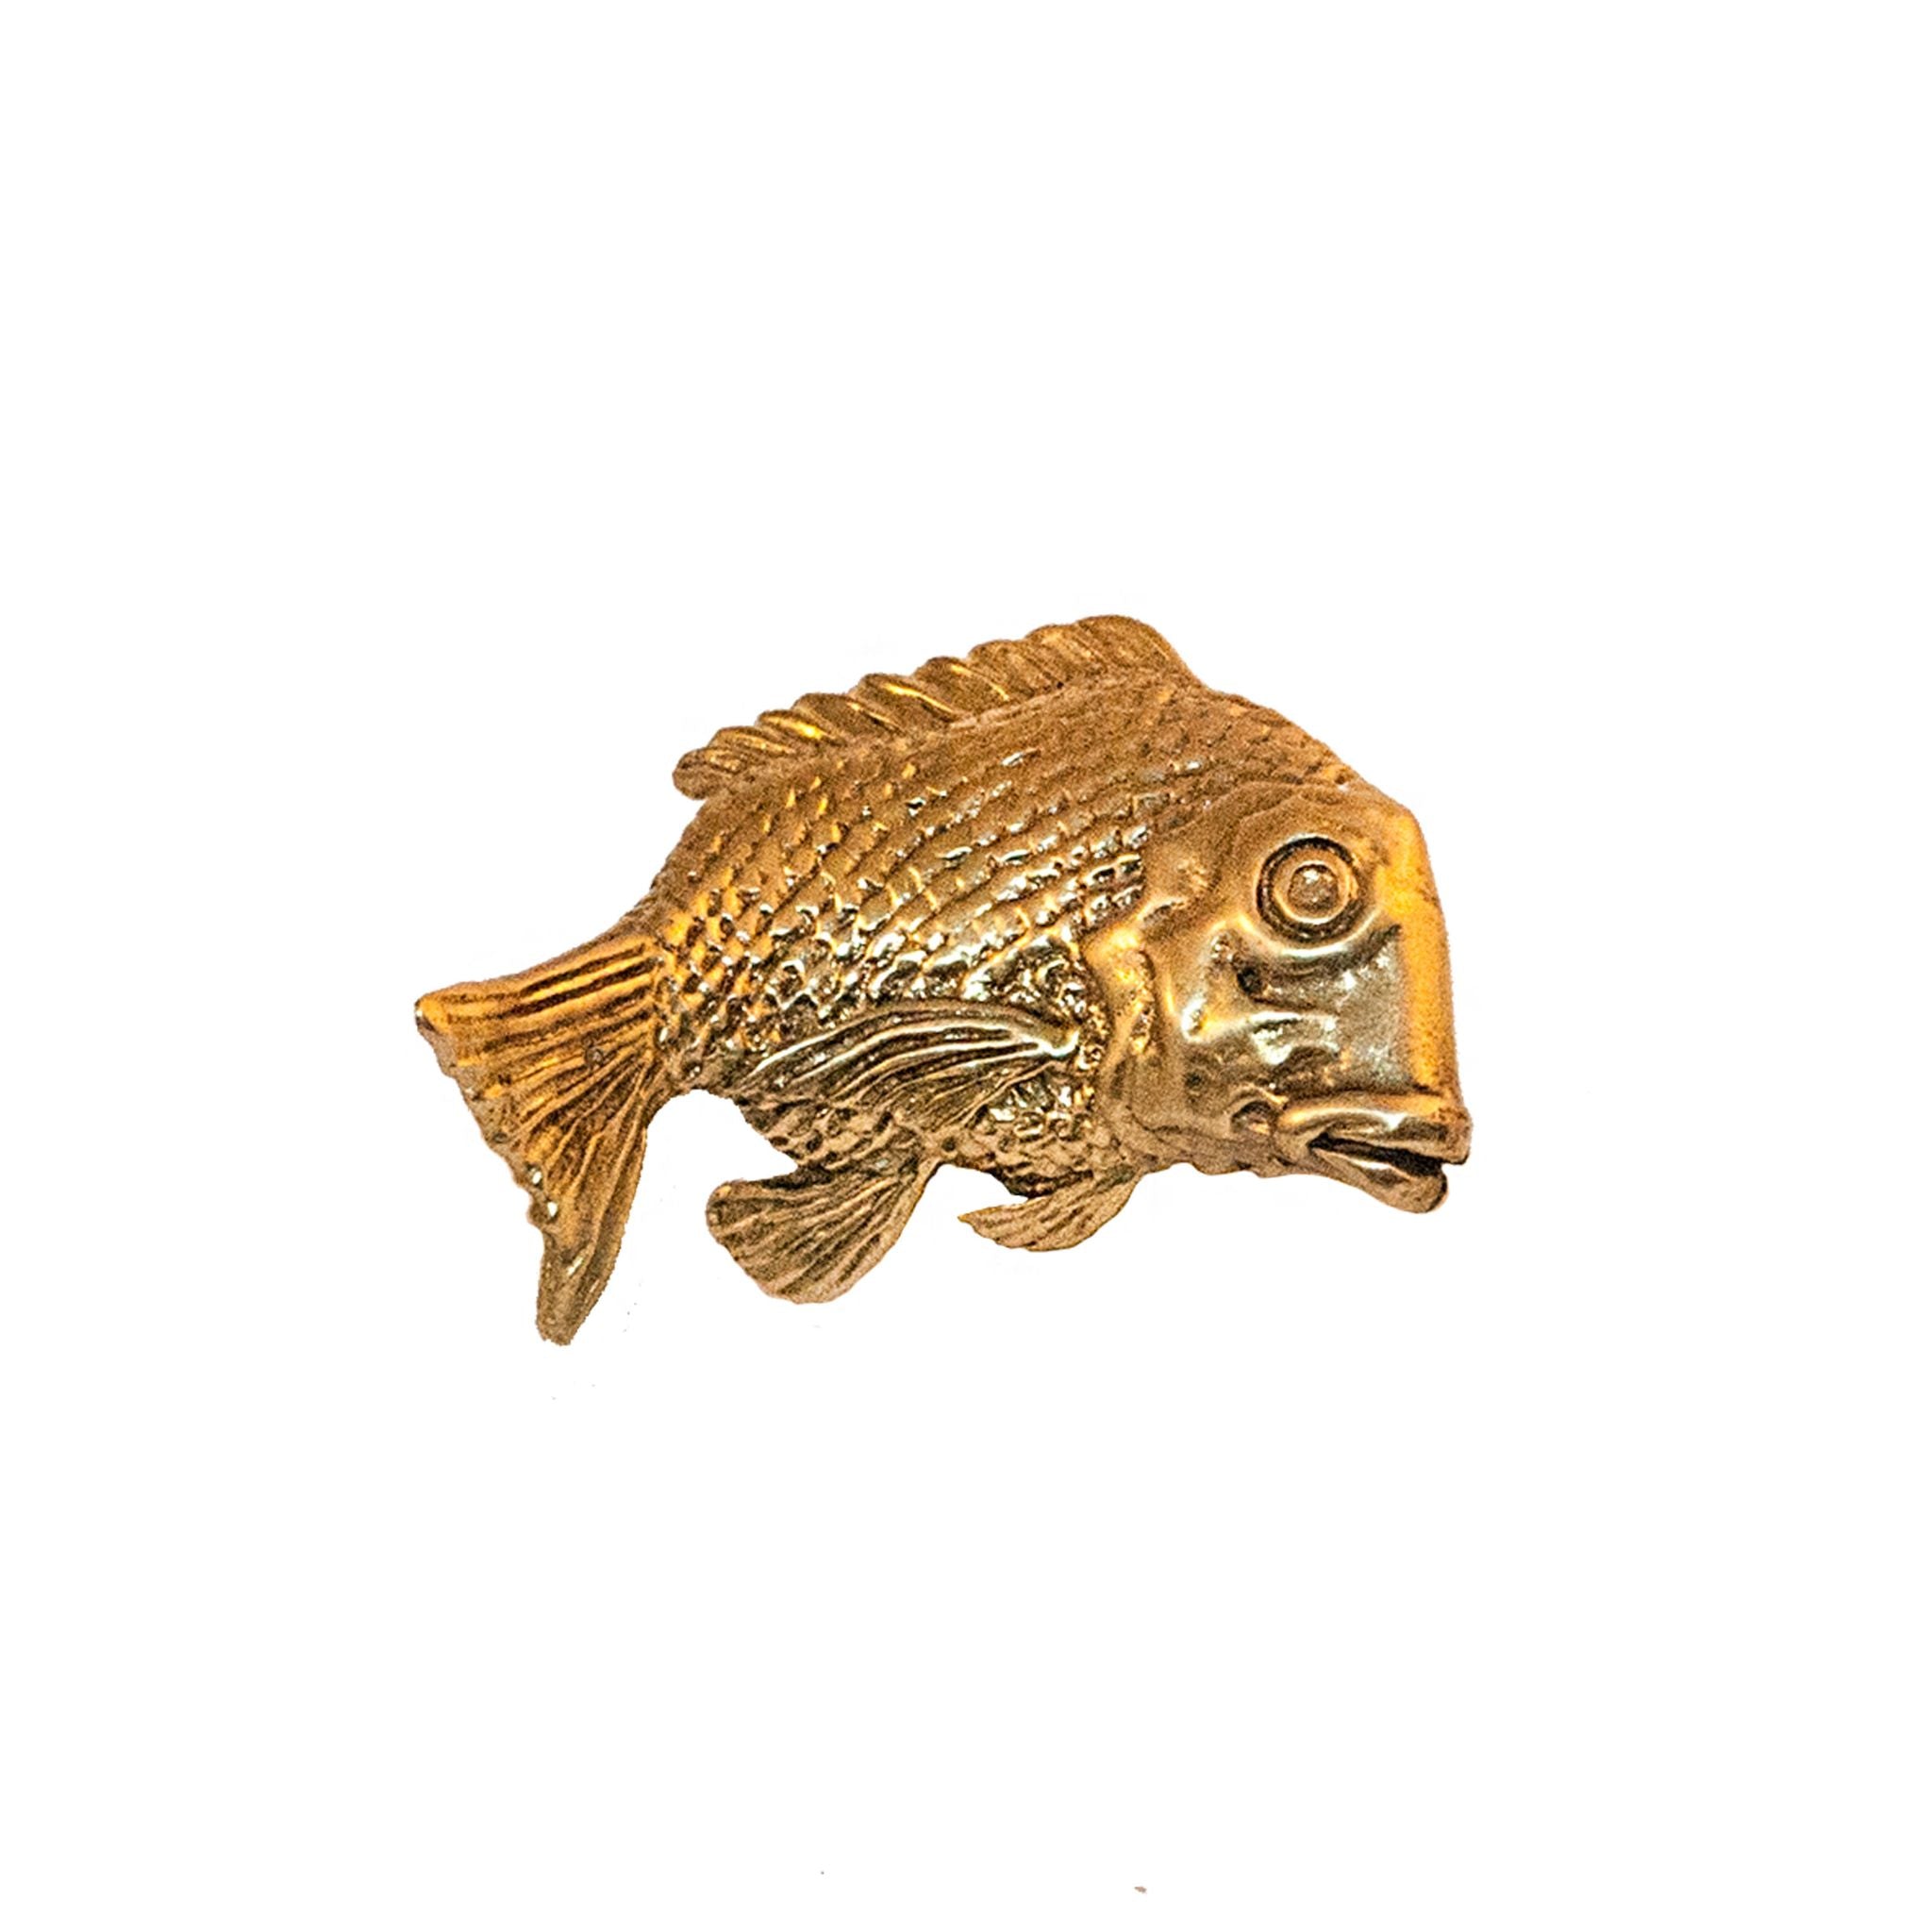 Brass Portofino fish-shaped knob with intricate details and a polished finish, perfect for adding a touch of coastal elegance to cabinets and drawers.